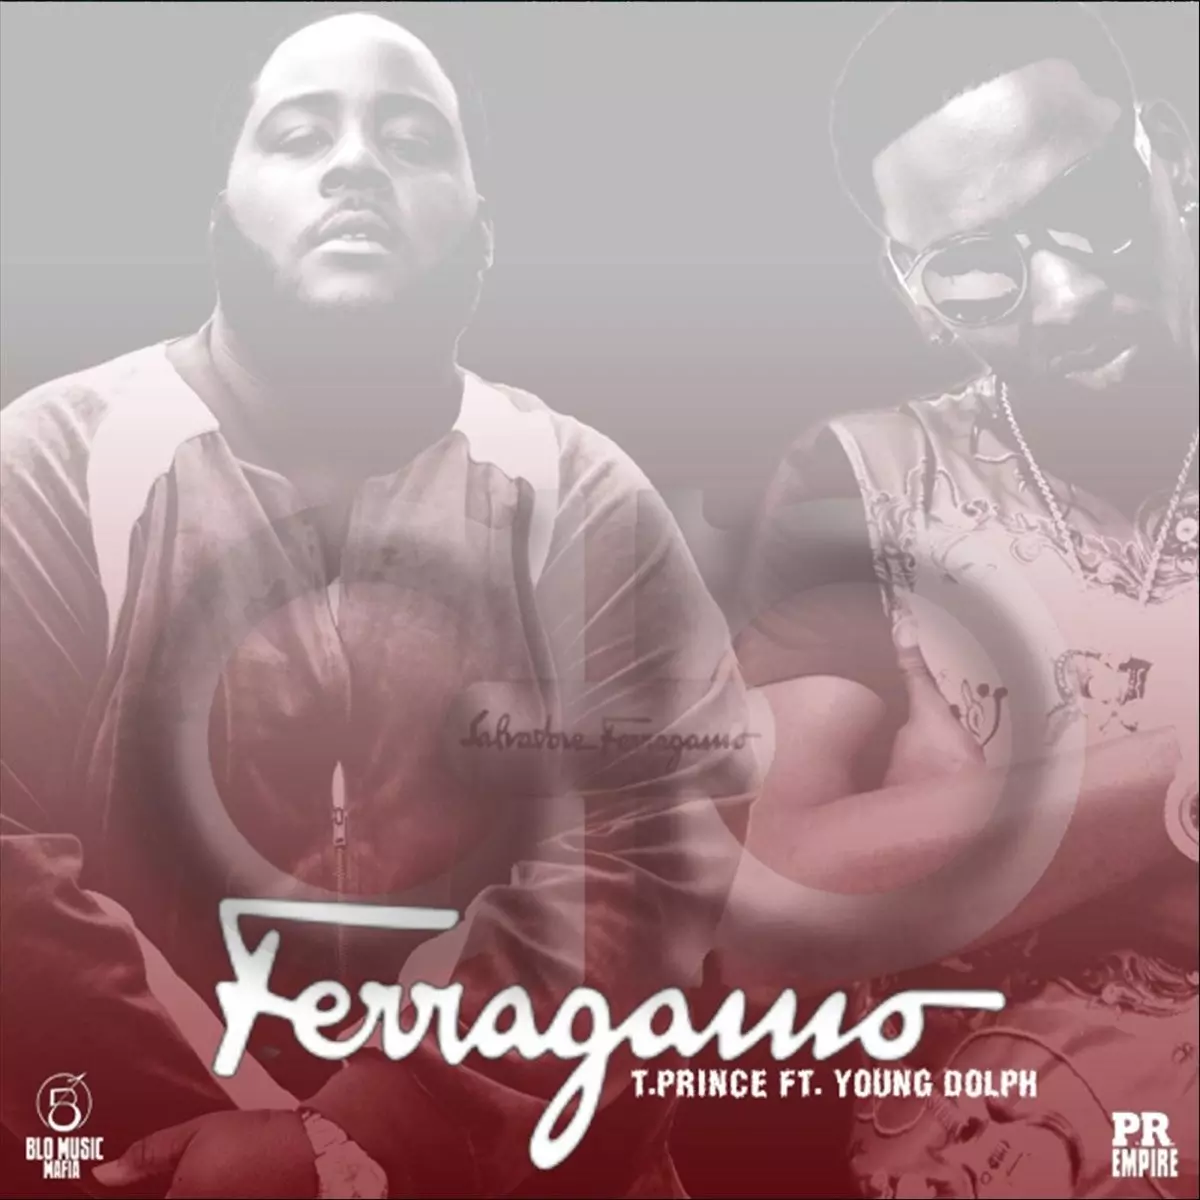 Ferragamo - Single by T.Prince & Young Dolph on Apple Music